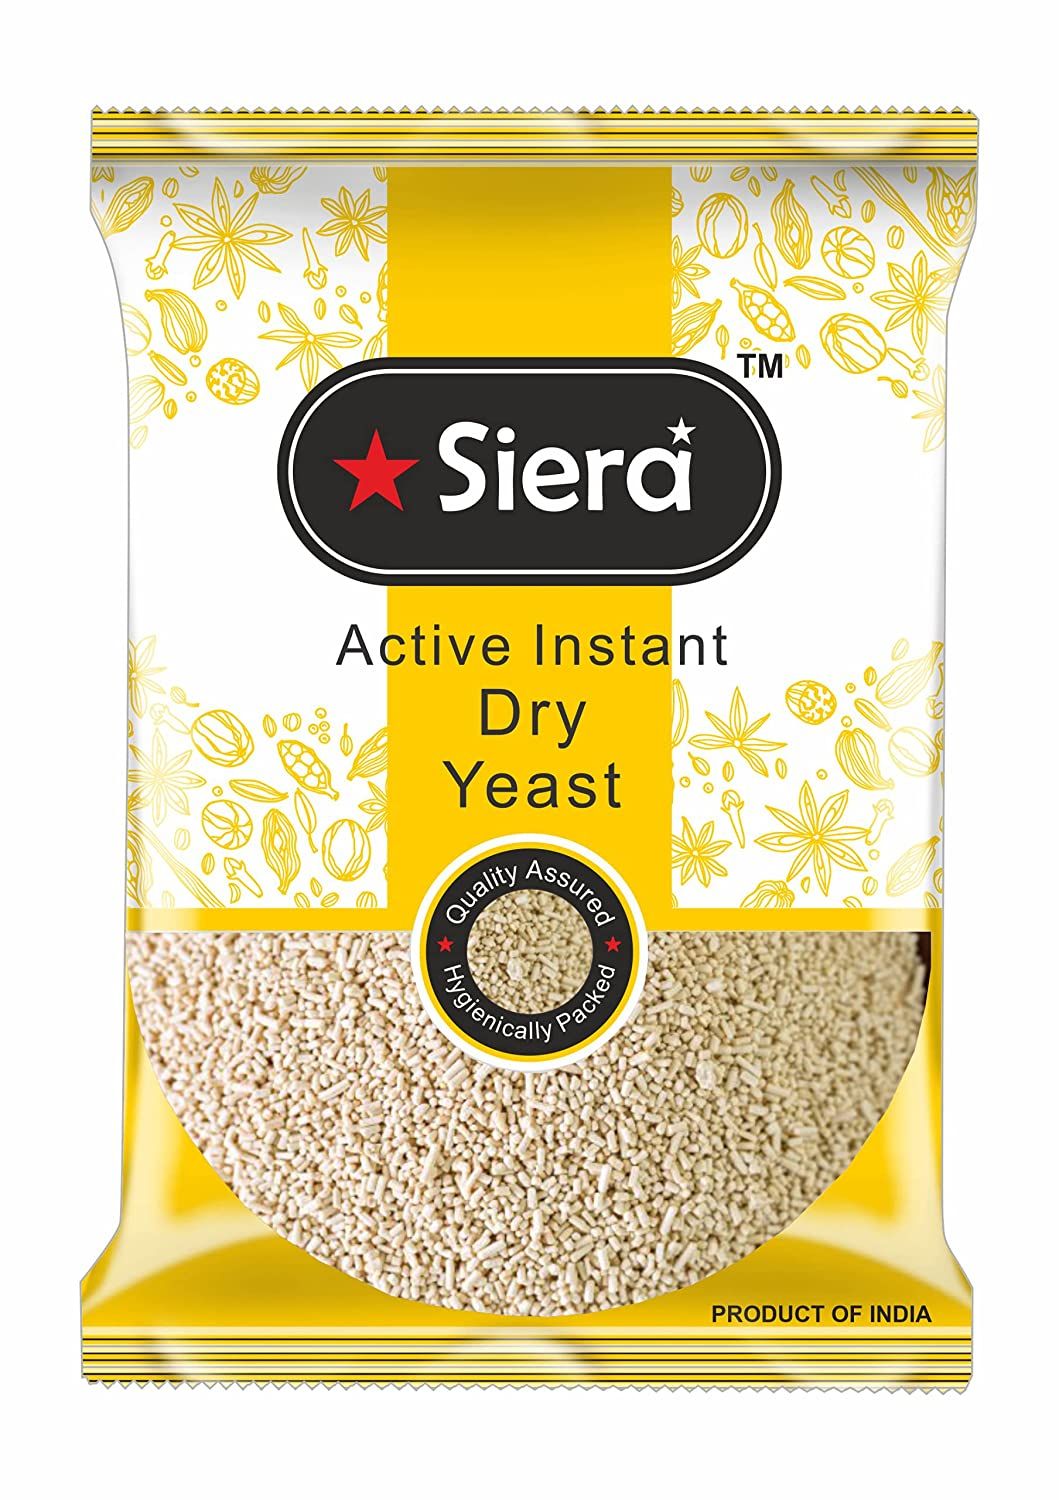 Siera Bakers Active Dry Yeast Image